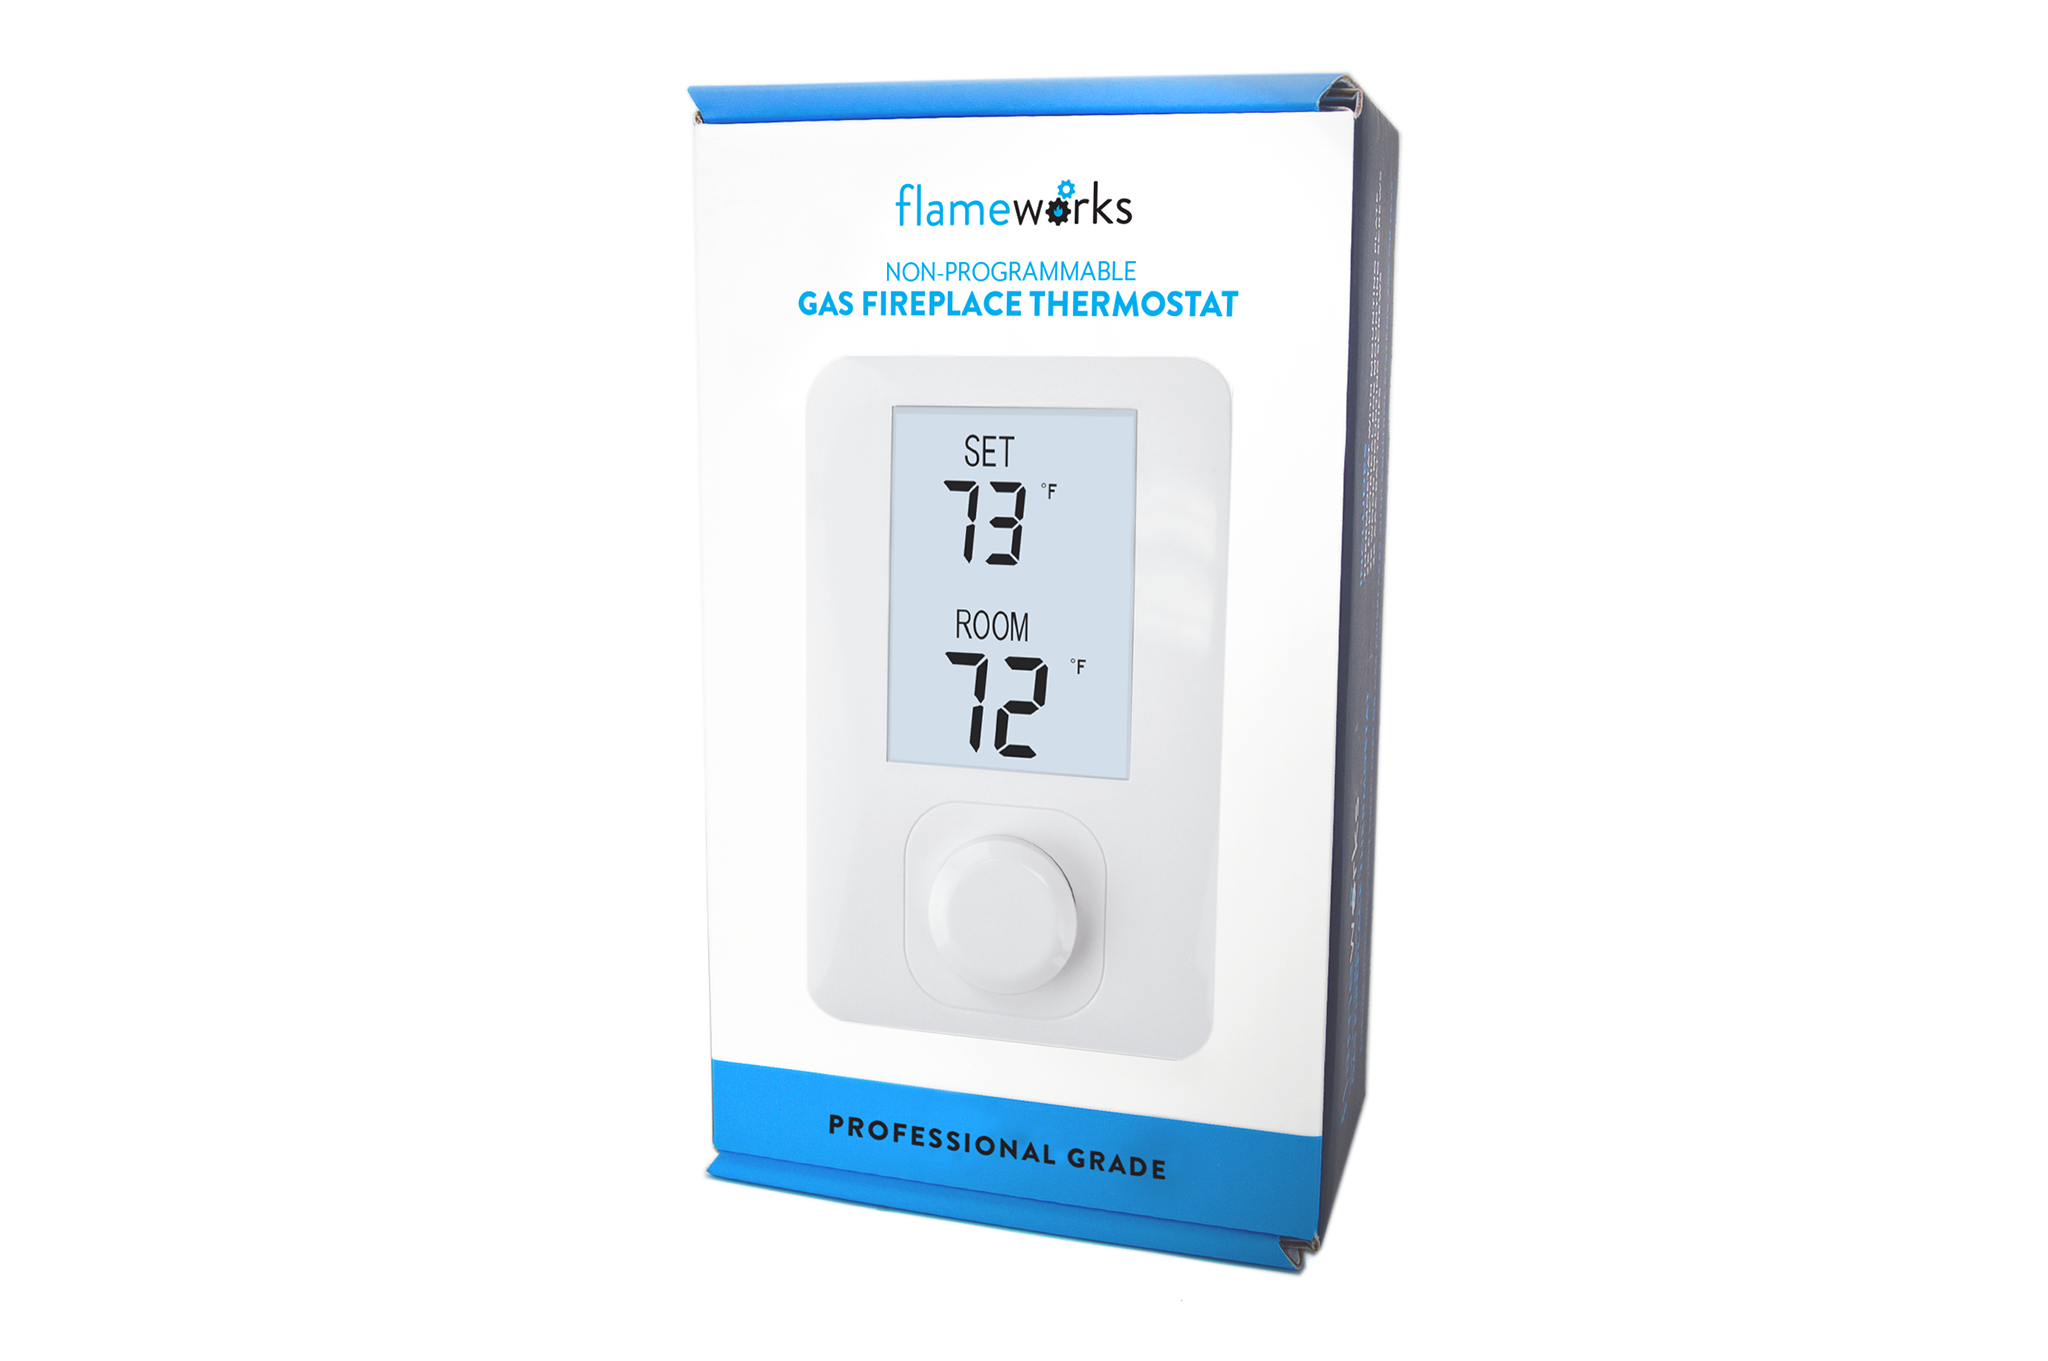 Flameworks Gas Fireplace Thermostat (Non-Programmable, Vertical Mount)